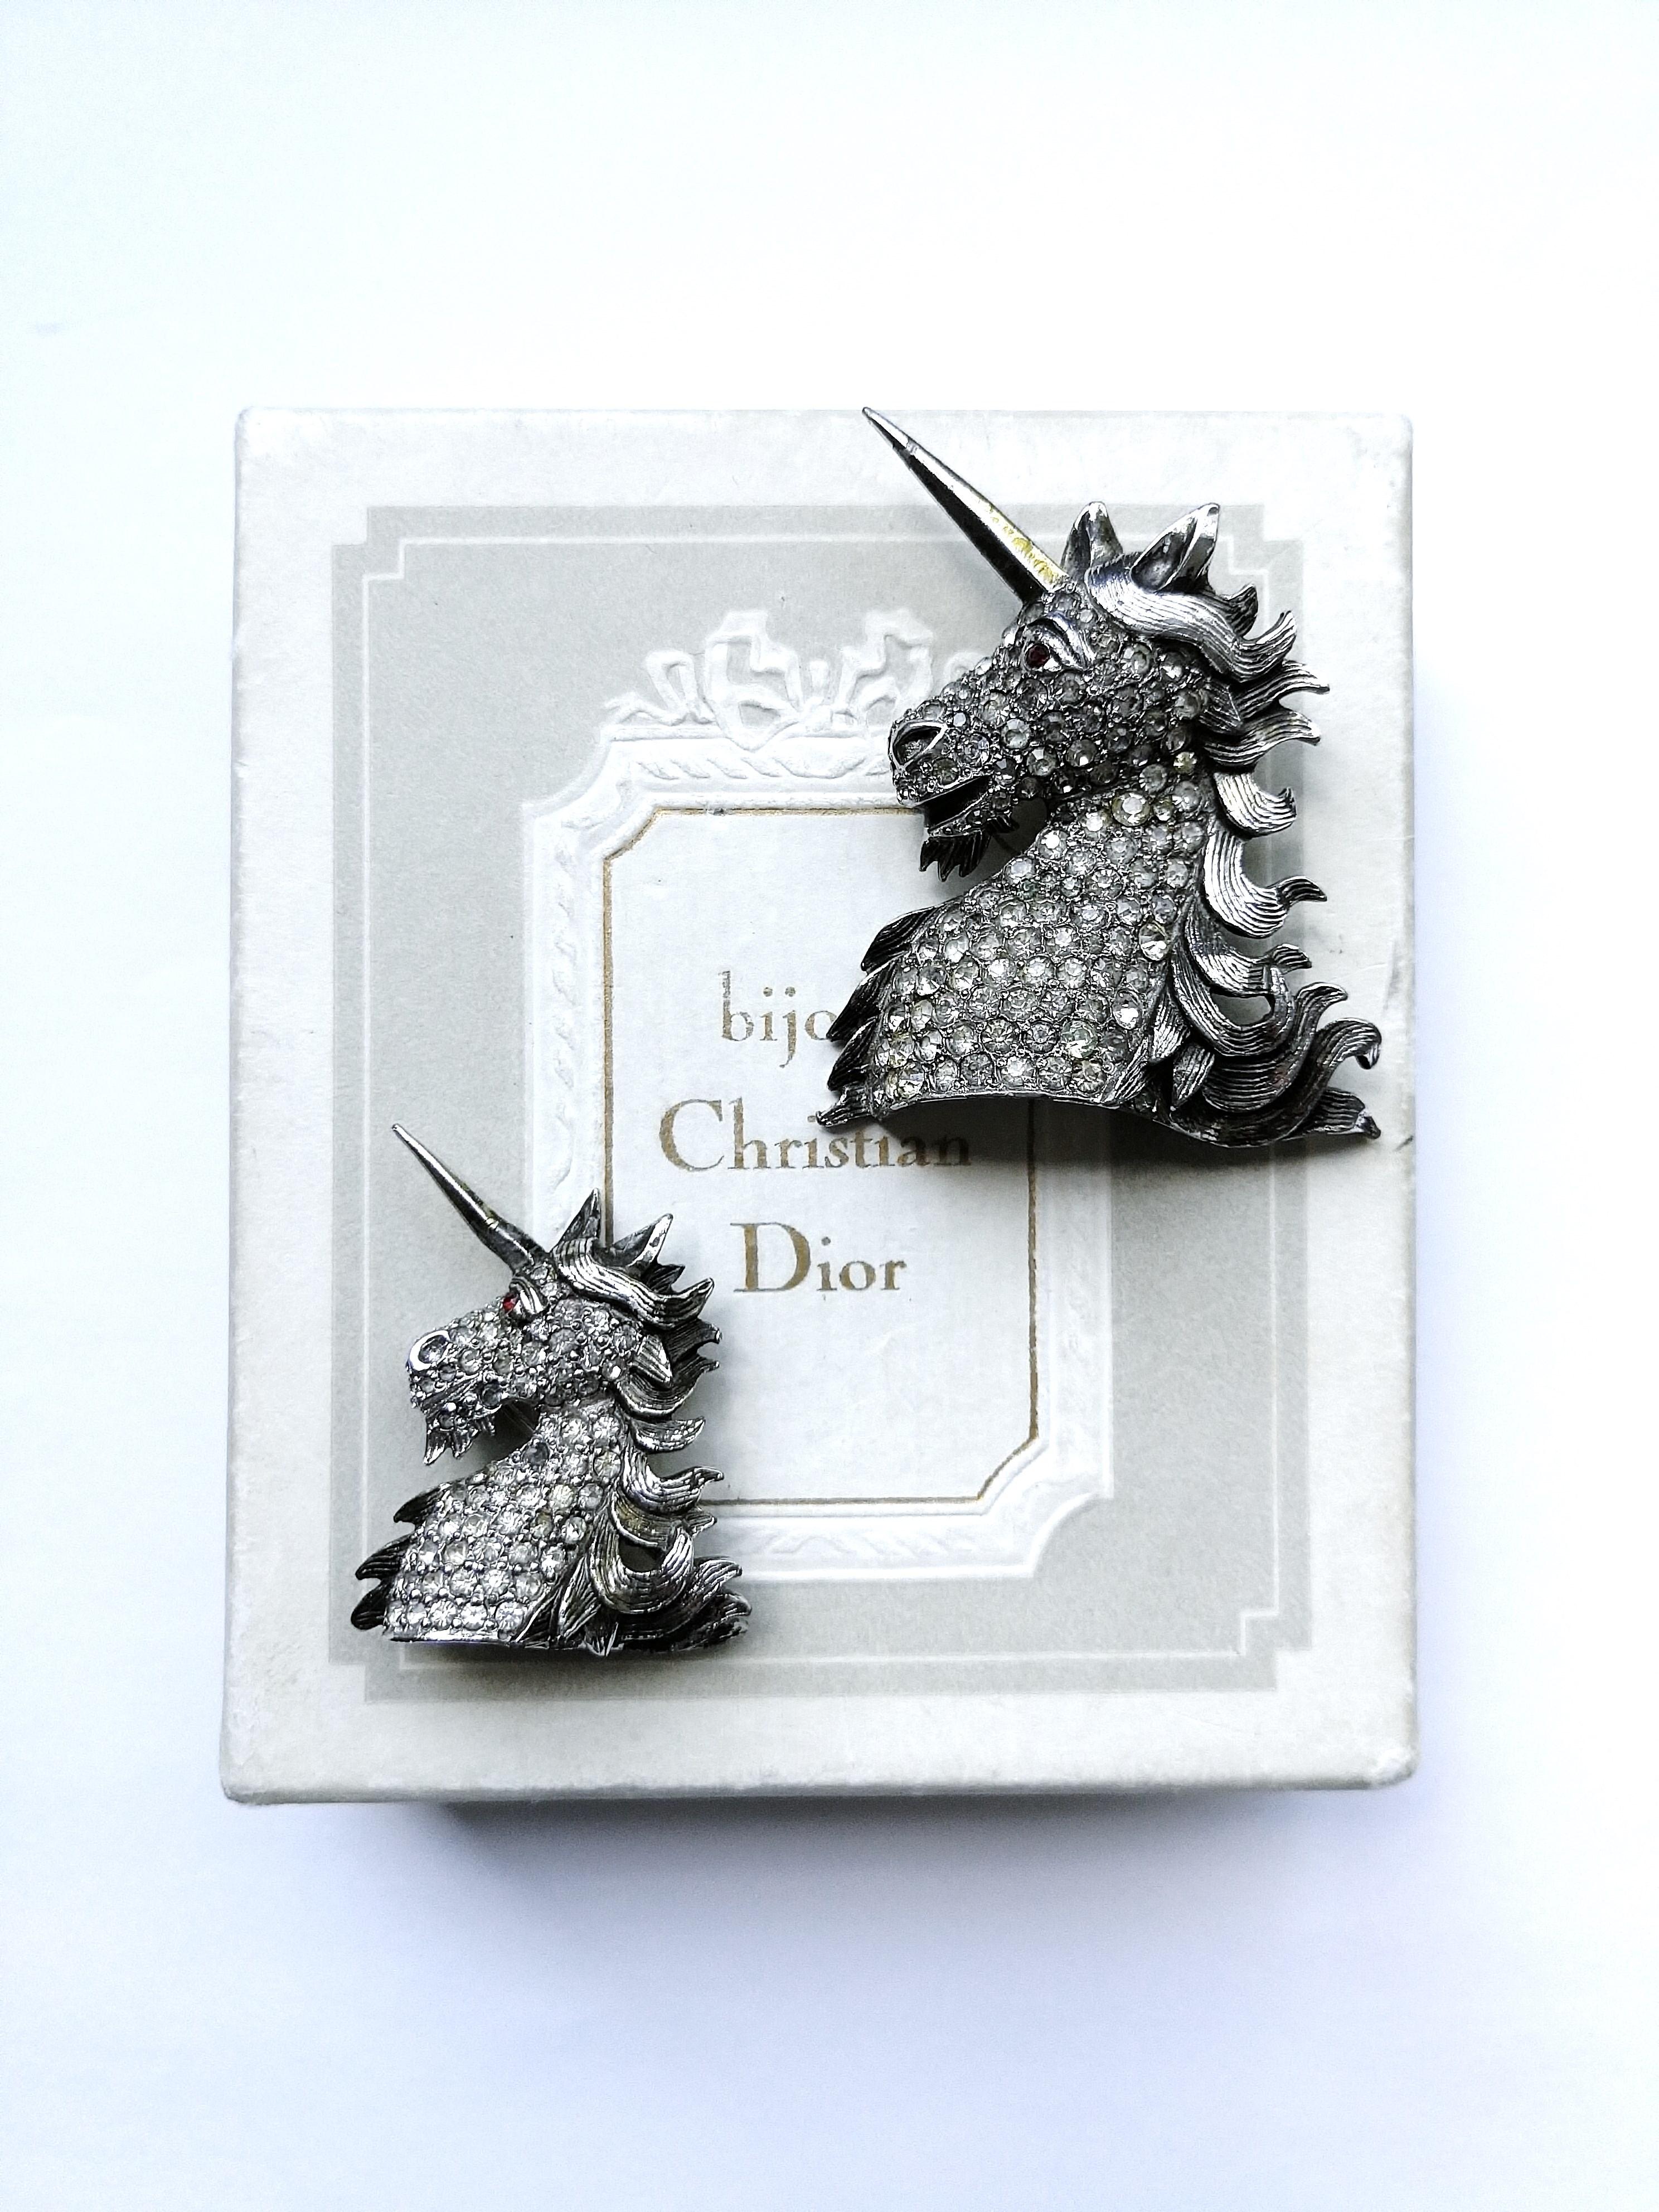 A pair of very rare 'unicorn' brooches from Christian Dior, such magical, exquisite subjects.
Made from base metal with a soft gilding and silvering, and clear pastes, these are one of the most iconic and desirable jewels made by Mitchel Maer for